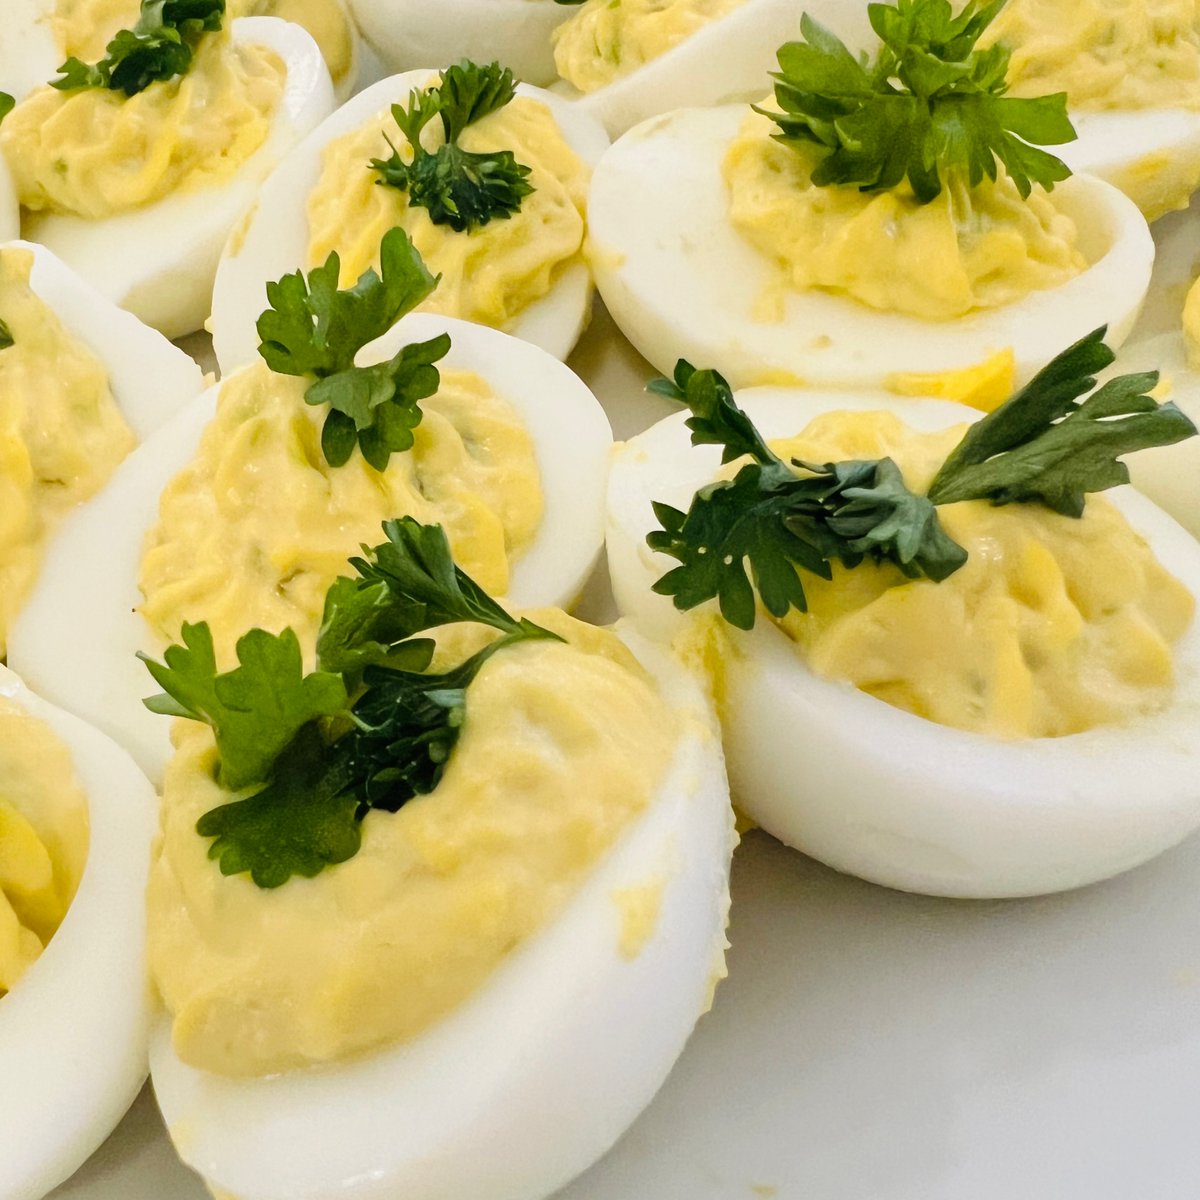 What’s are some of your favorite flavors of deviled eggs? #deviledeggs #eggs #itsaparty #barre #centralvermont